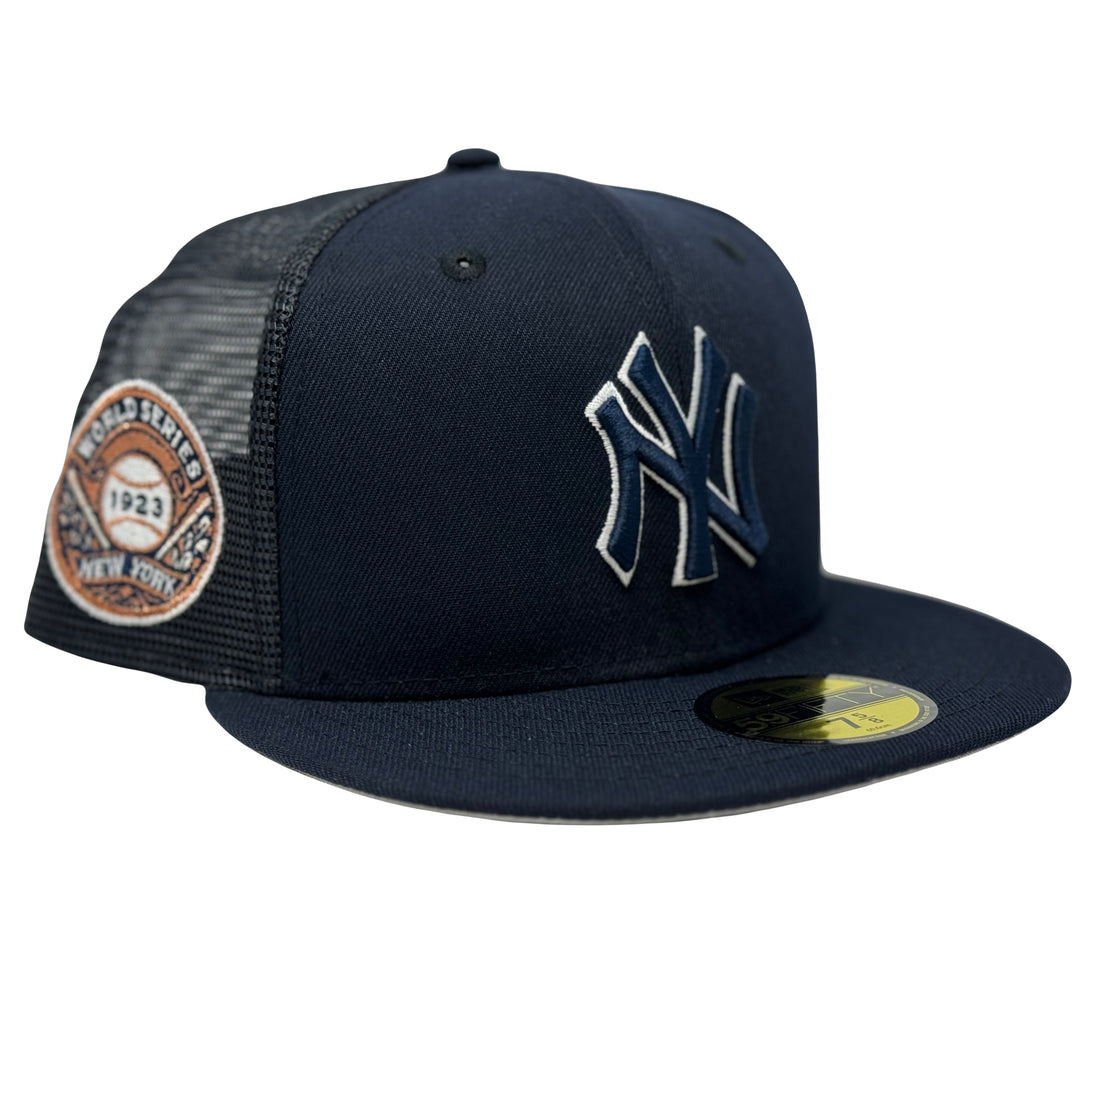 New York Yankees 1923 World Series Navy Blue 5950 New Era Fitted Hat